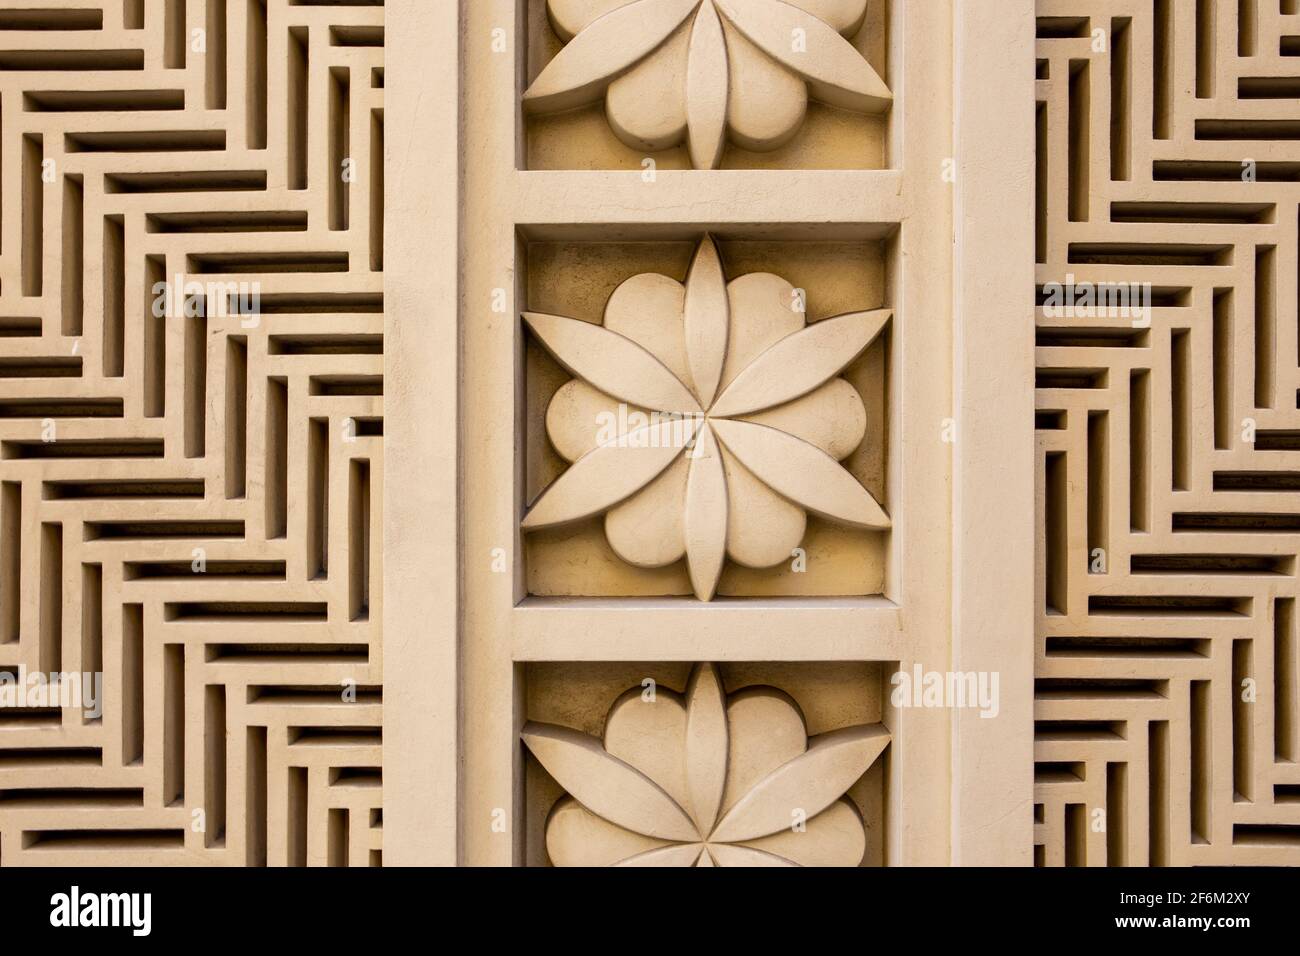 Arabic style carved stone openwork and relief, with floral patterns and geometric shapes and lines, on a building facade in Dubai JBR, UAE. Stock Photo